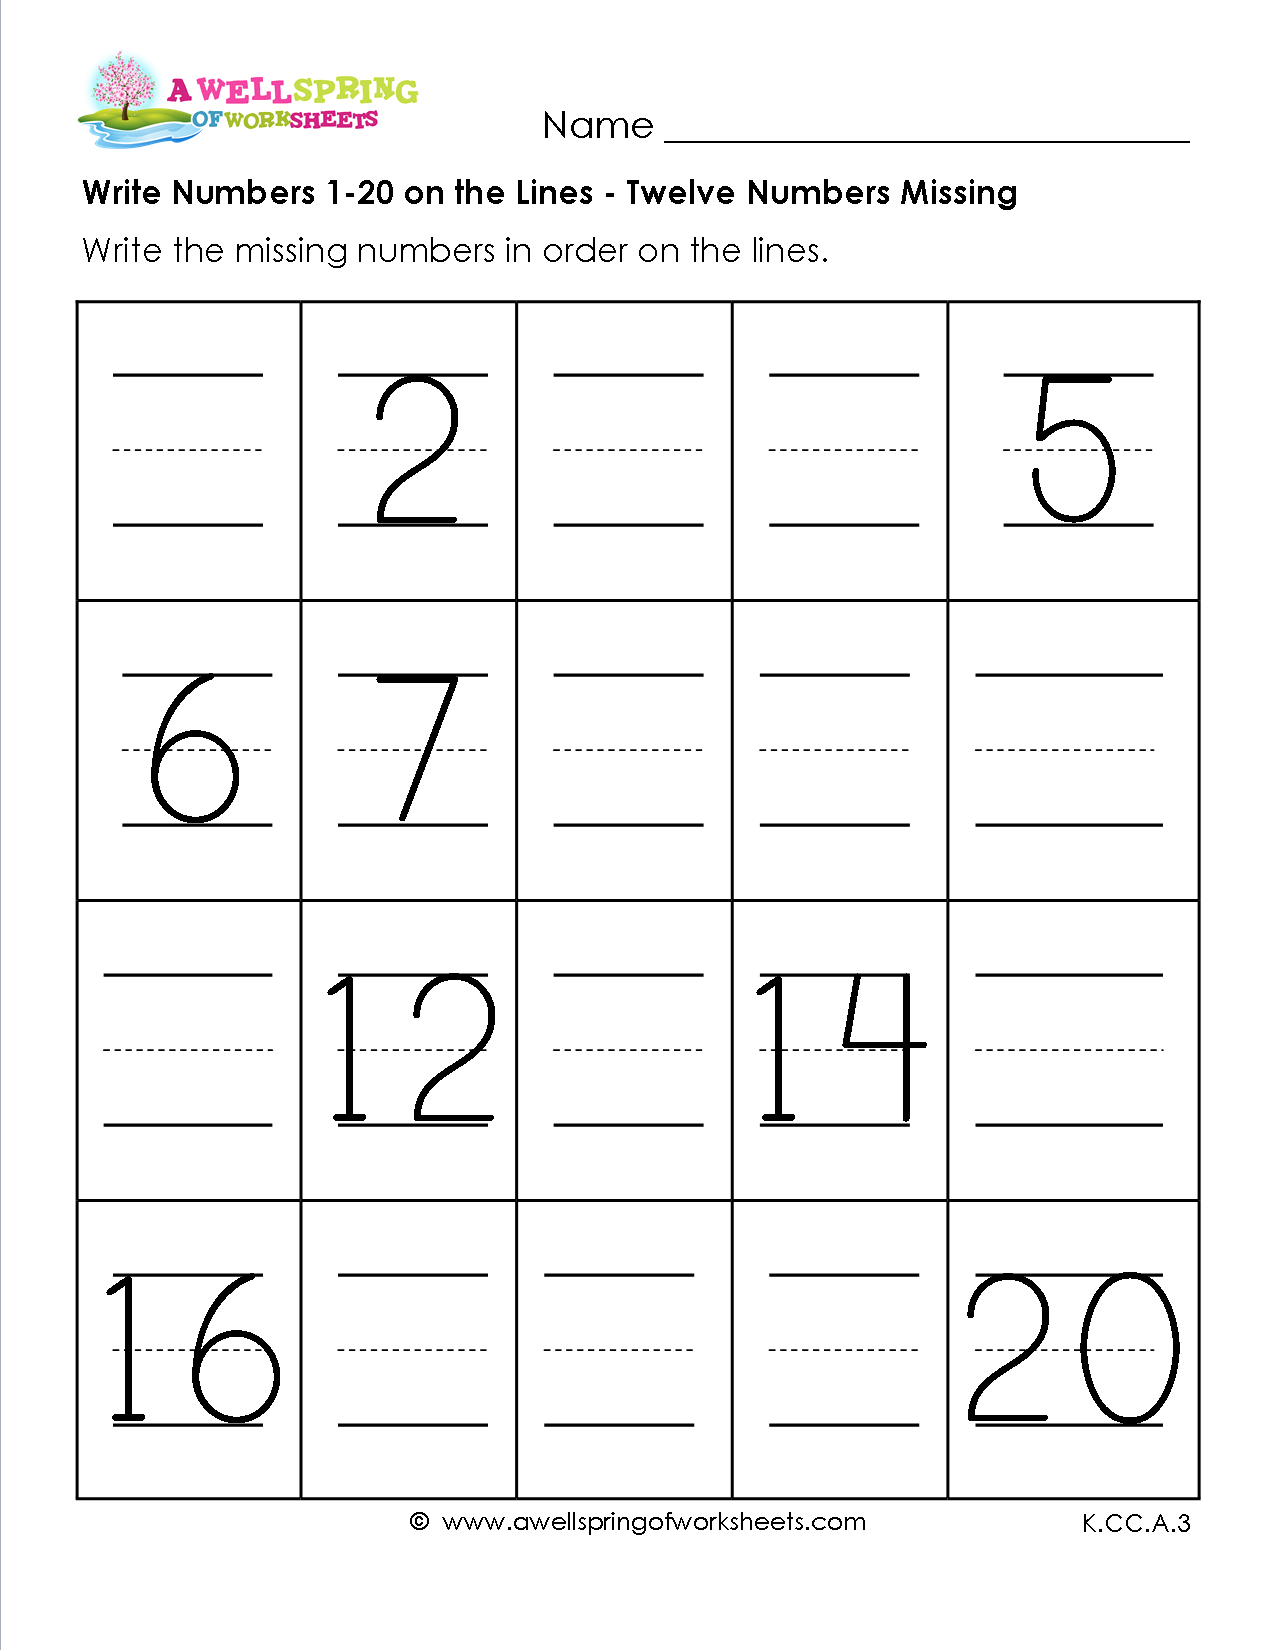 Grade Level Worksheets | A Wellspring Of Worksheets | Math intended for Tracing Name Madison